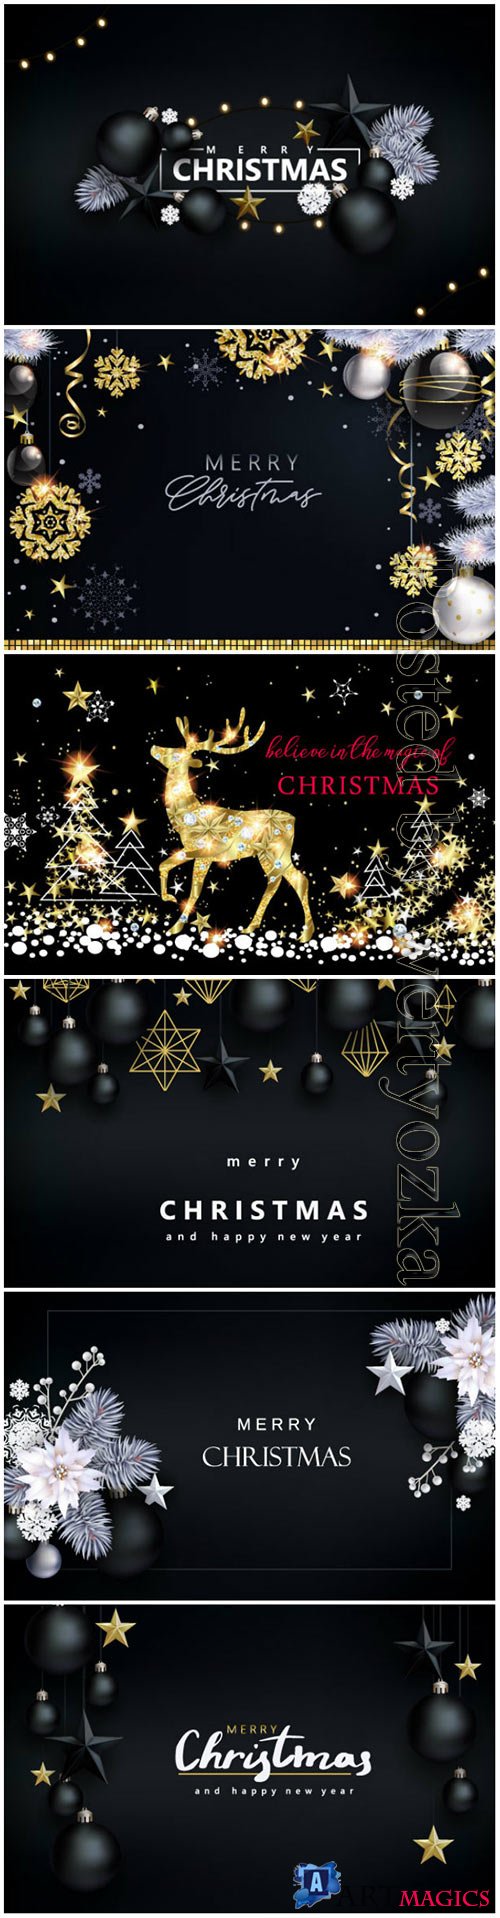 Christmas with black and white balls vector illustration